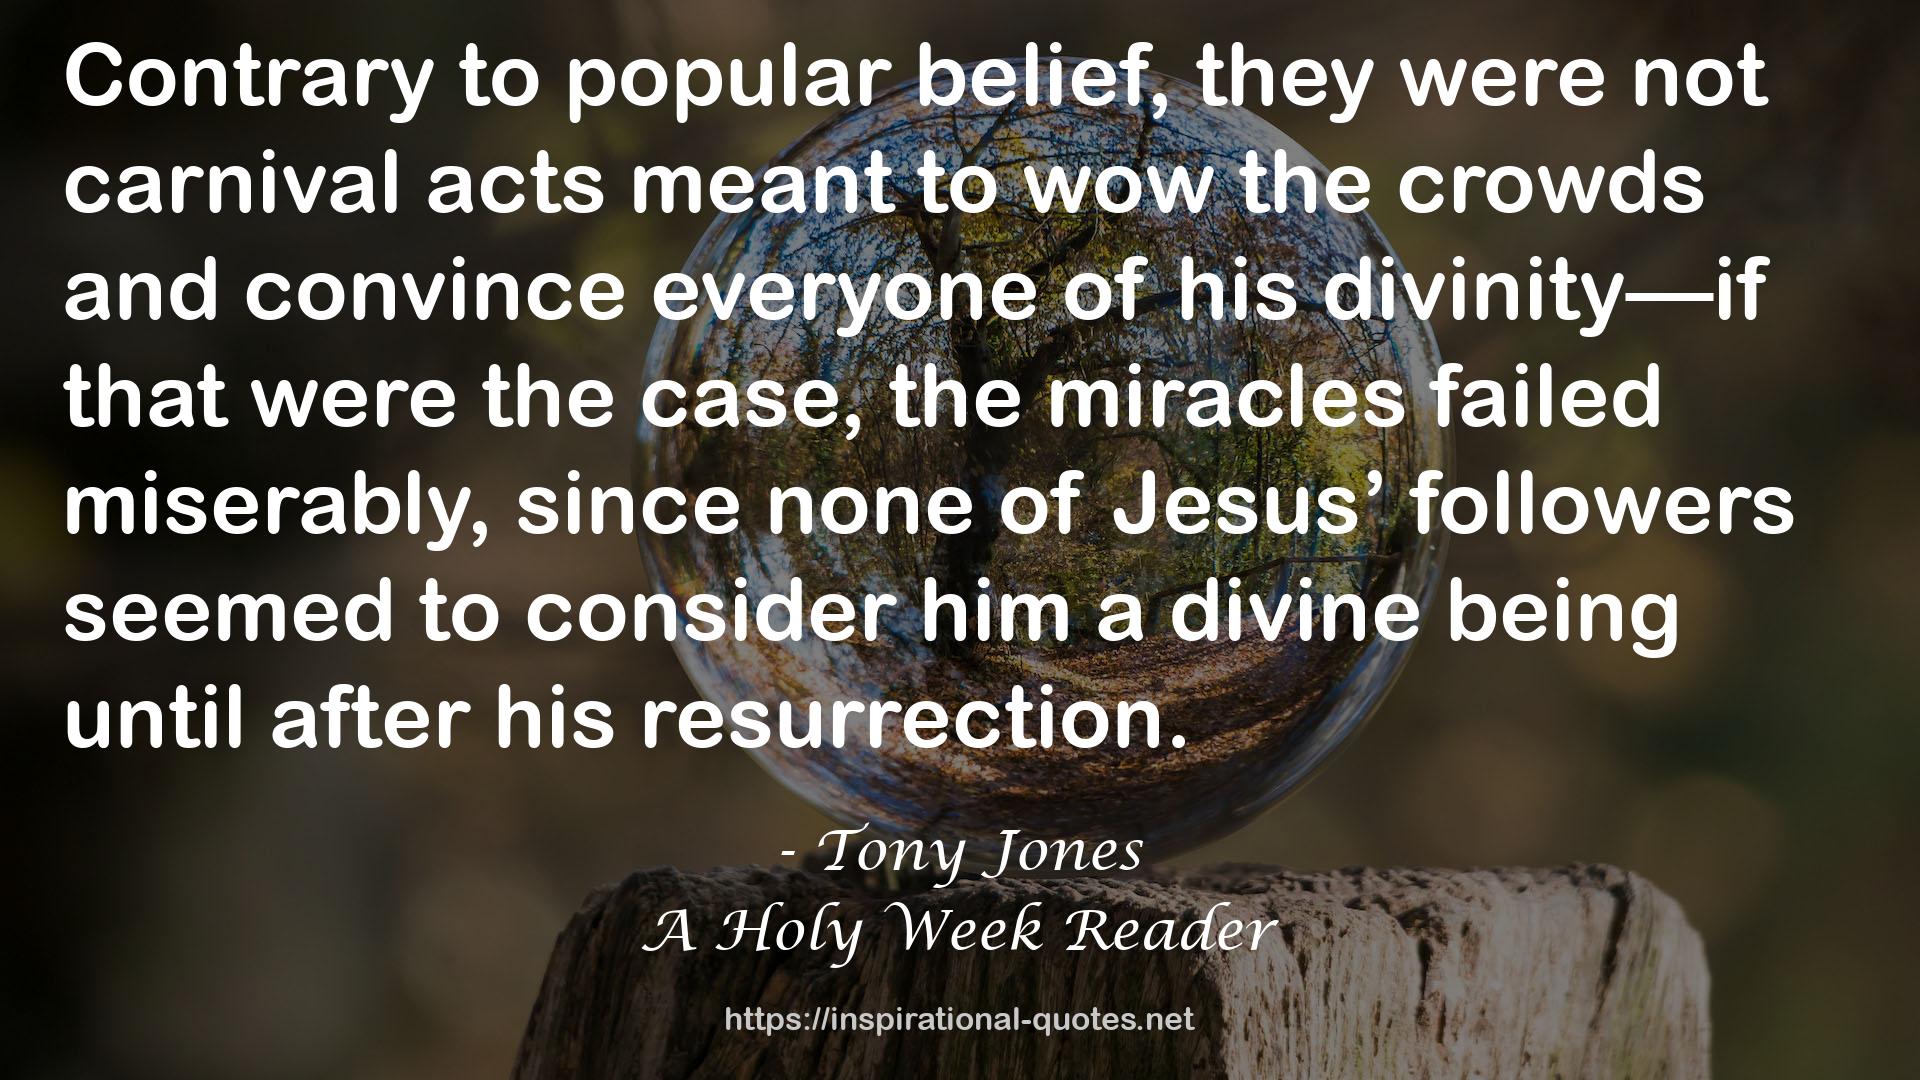 A Holy Week Reader QUOTES